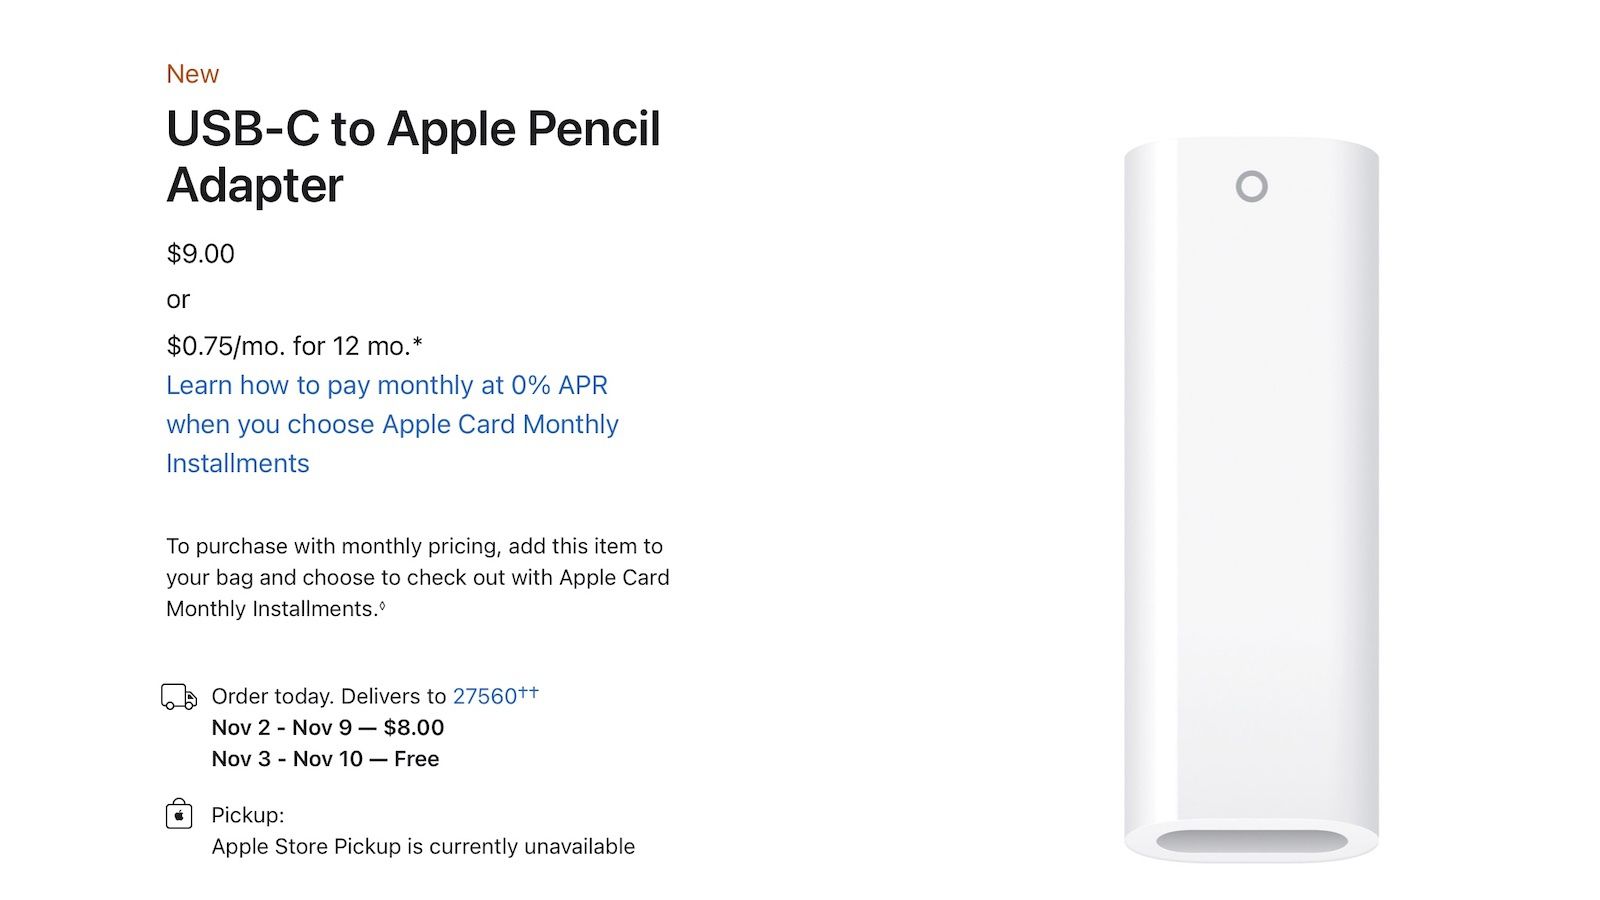 How to pair and charge your Apple Pencil